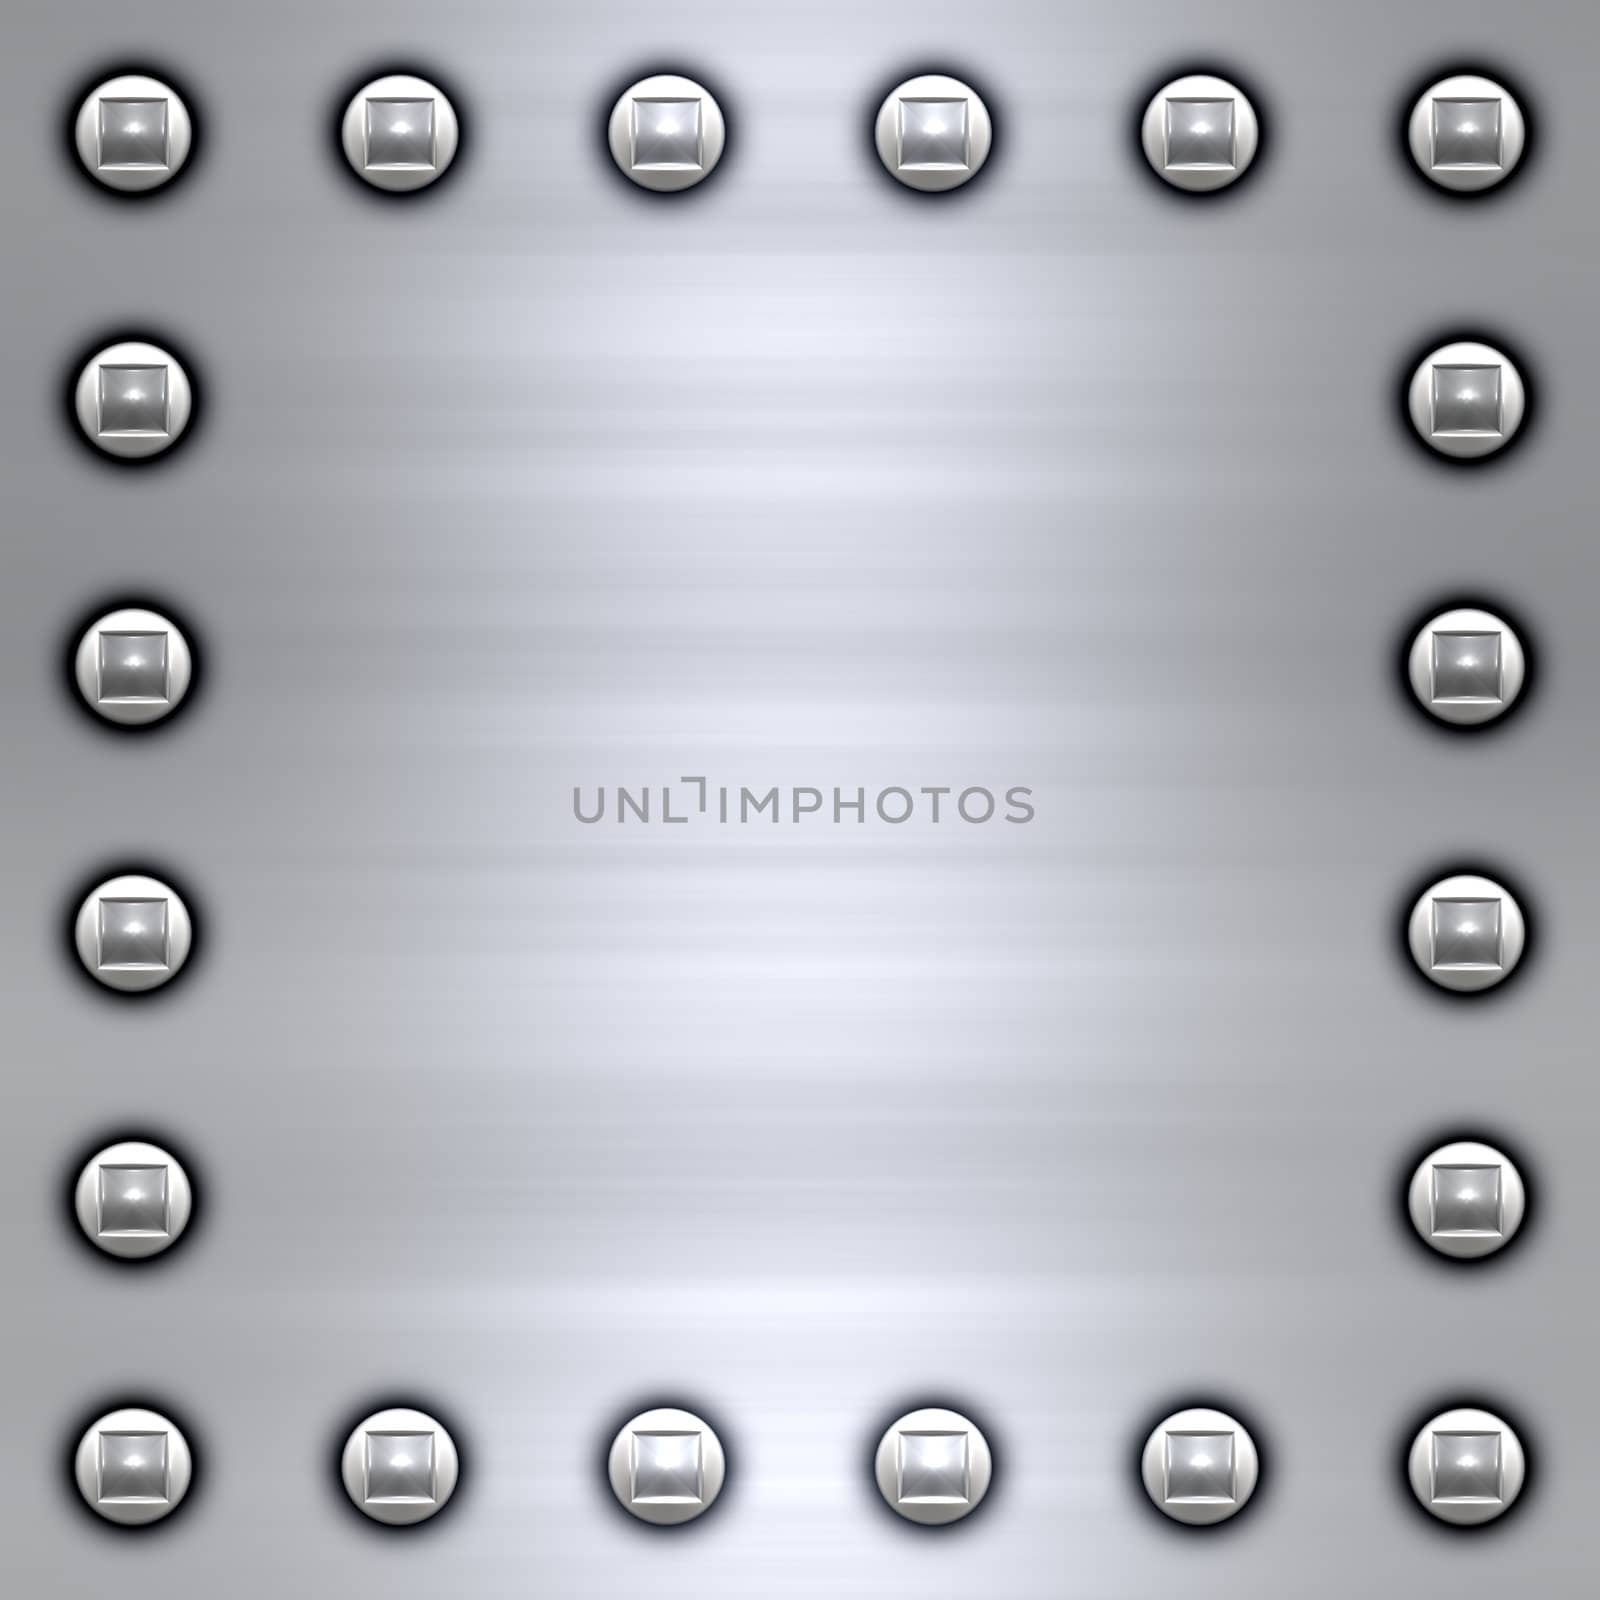 great background image of brushed steel or alloy with rivets